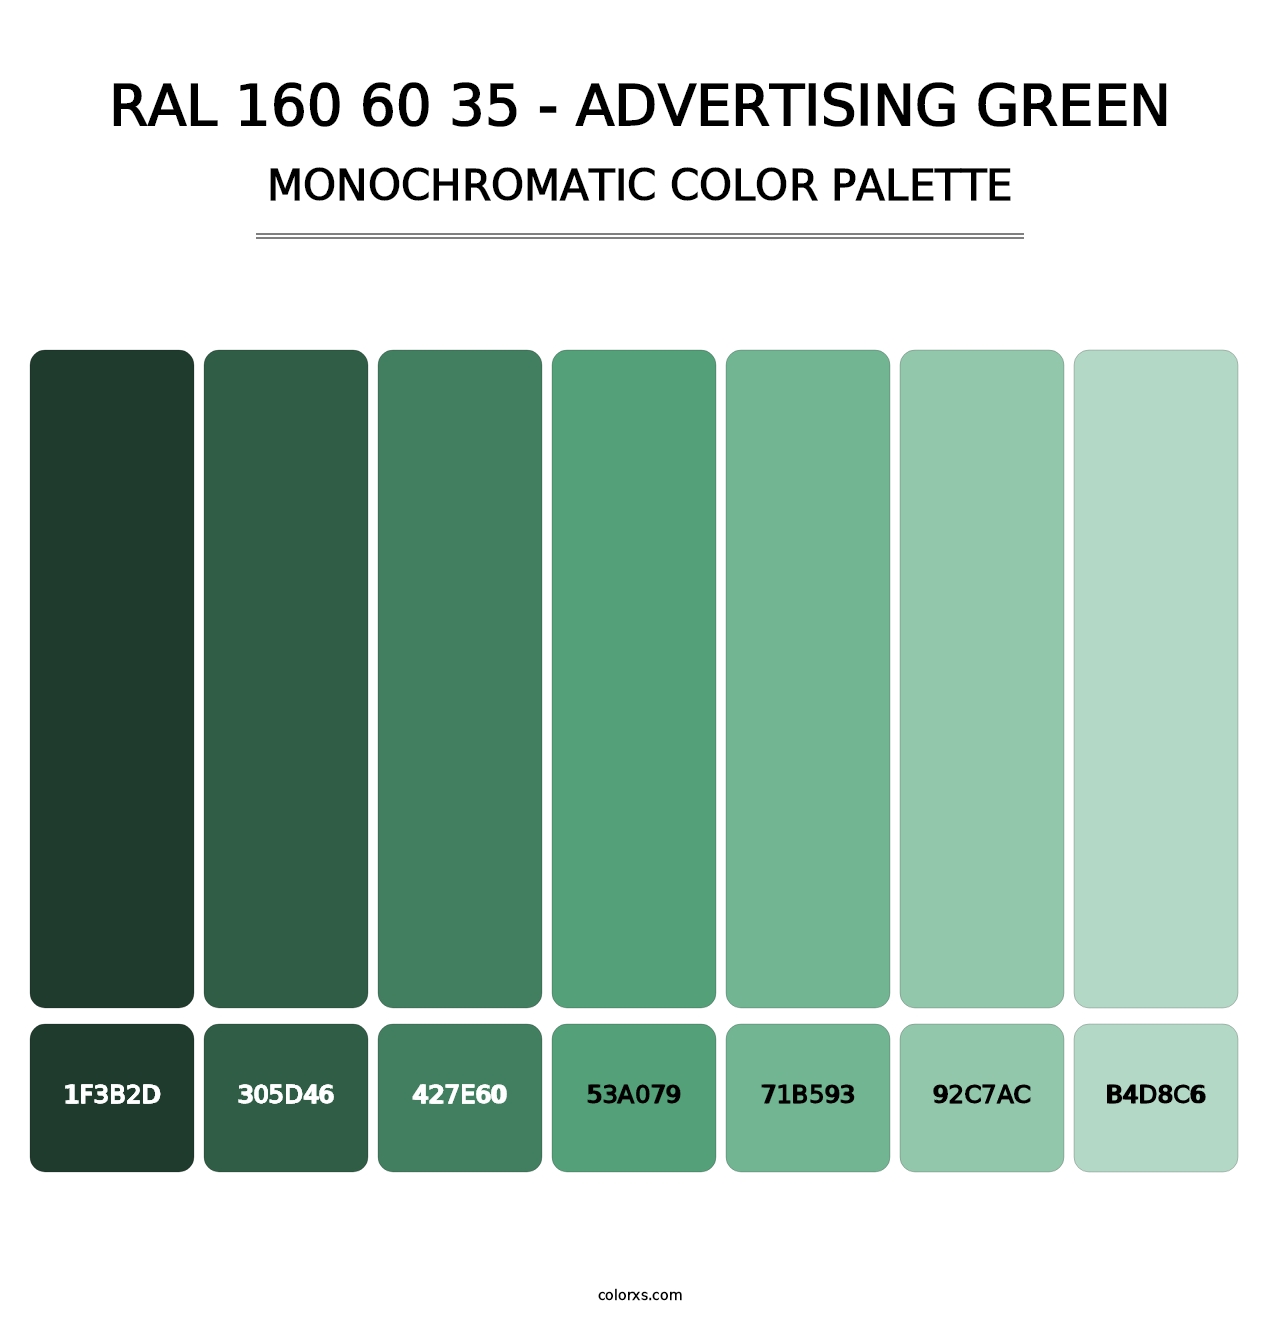 RAL 160 60 35 - Advertising Green - Monochromatic Color Palette